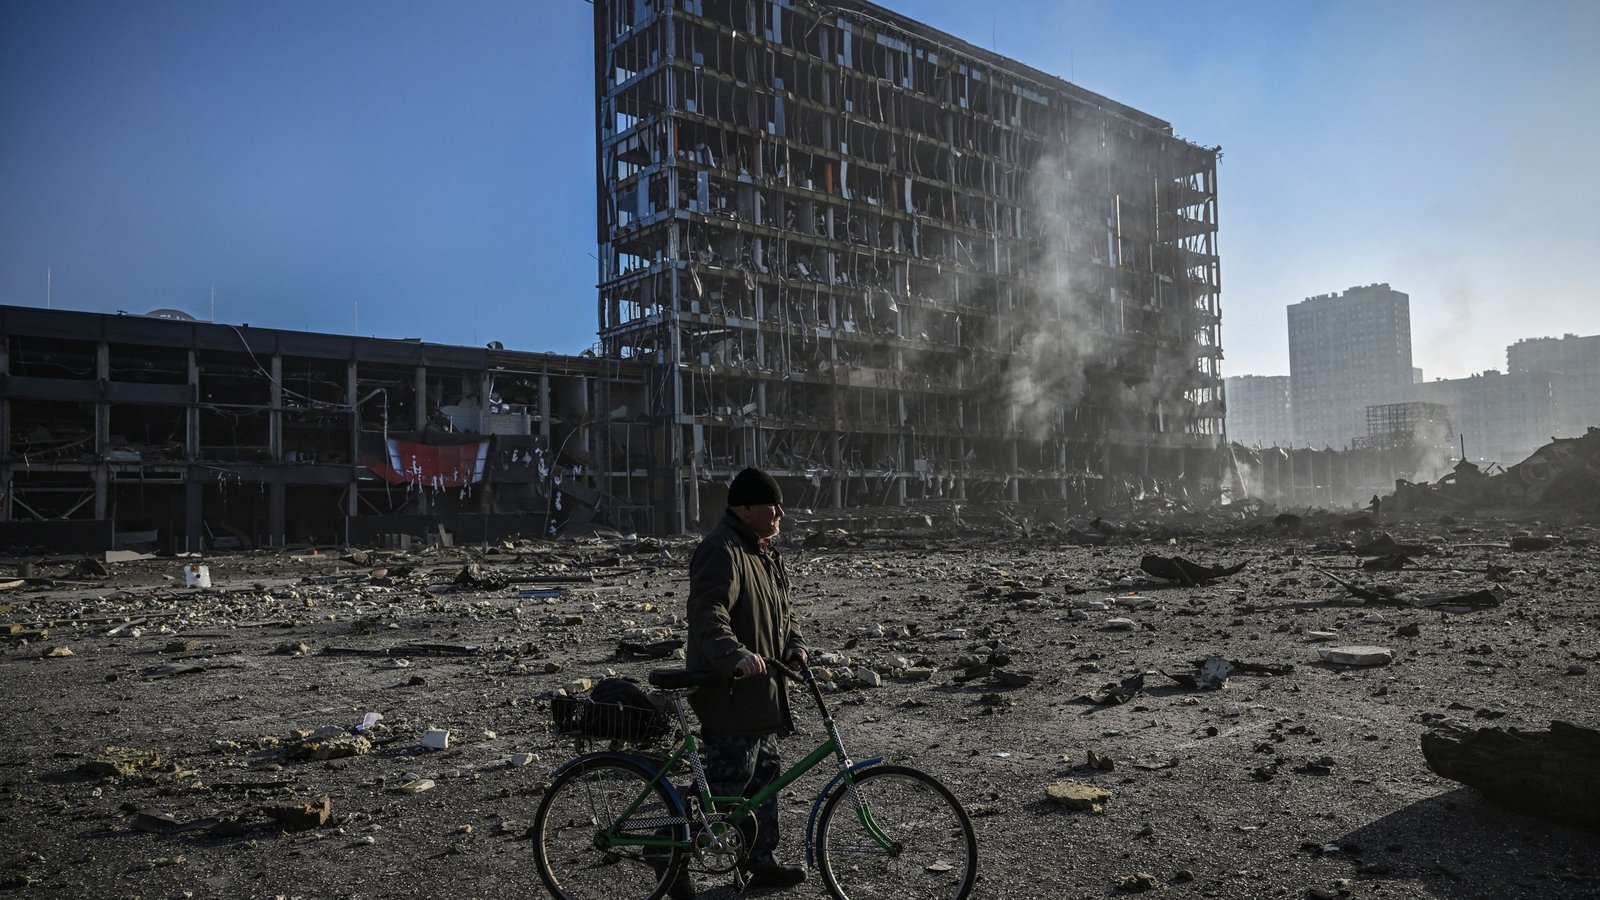 Image - A man with his bicycle walks through debris outside a destroyed shopping centre in Kyiv